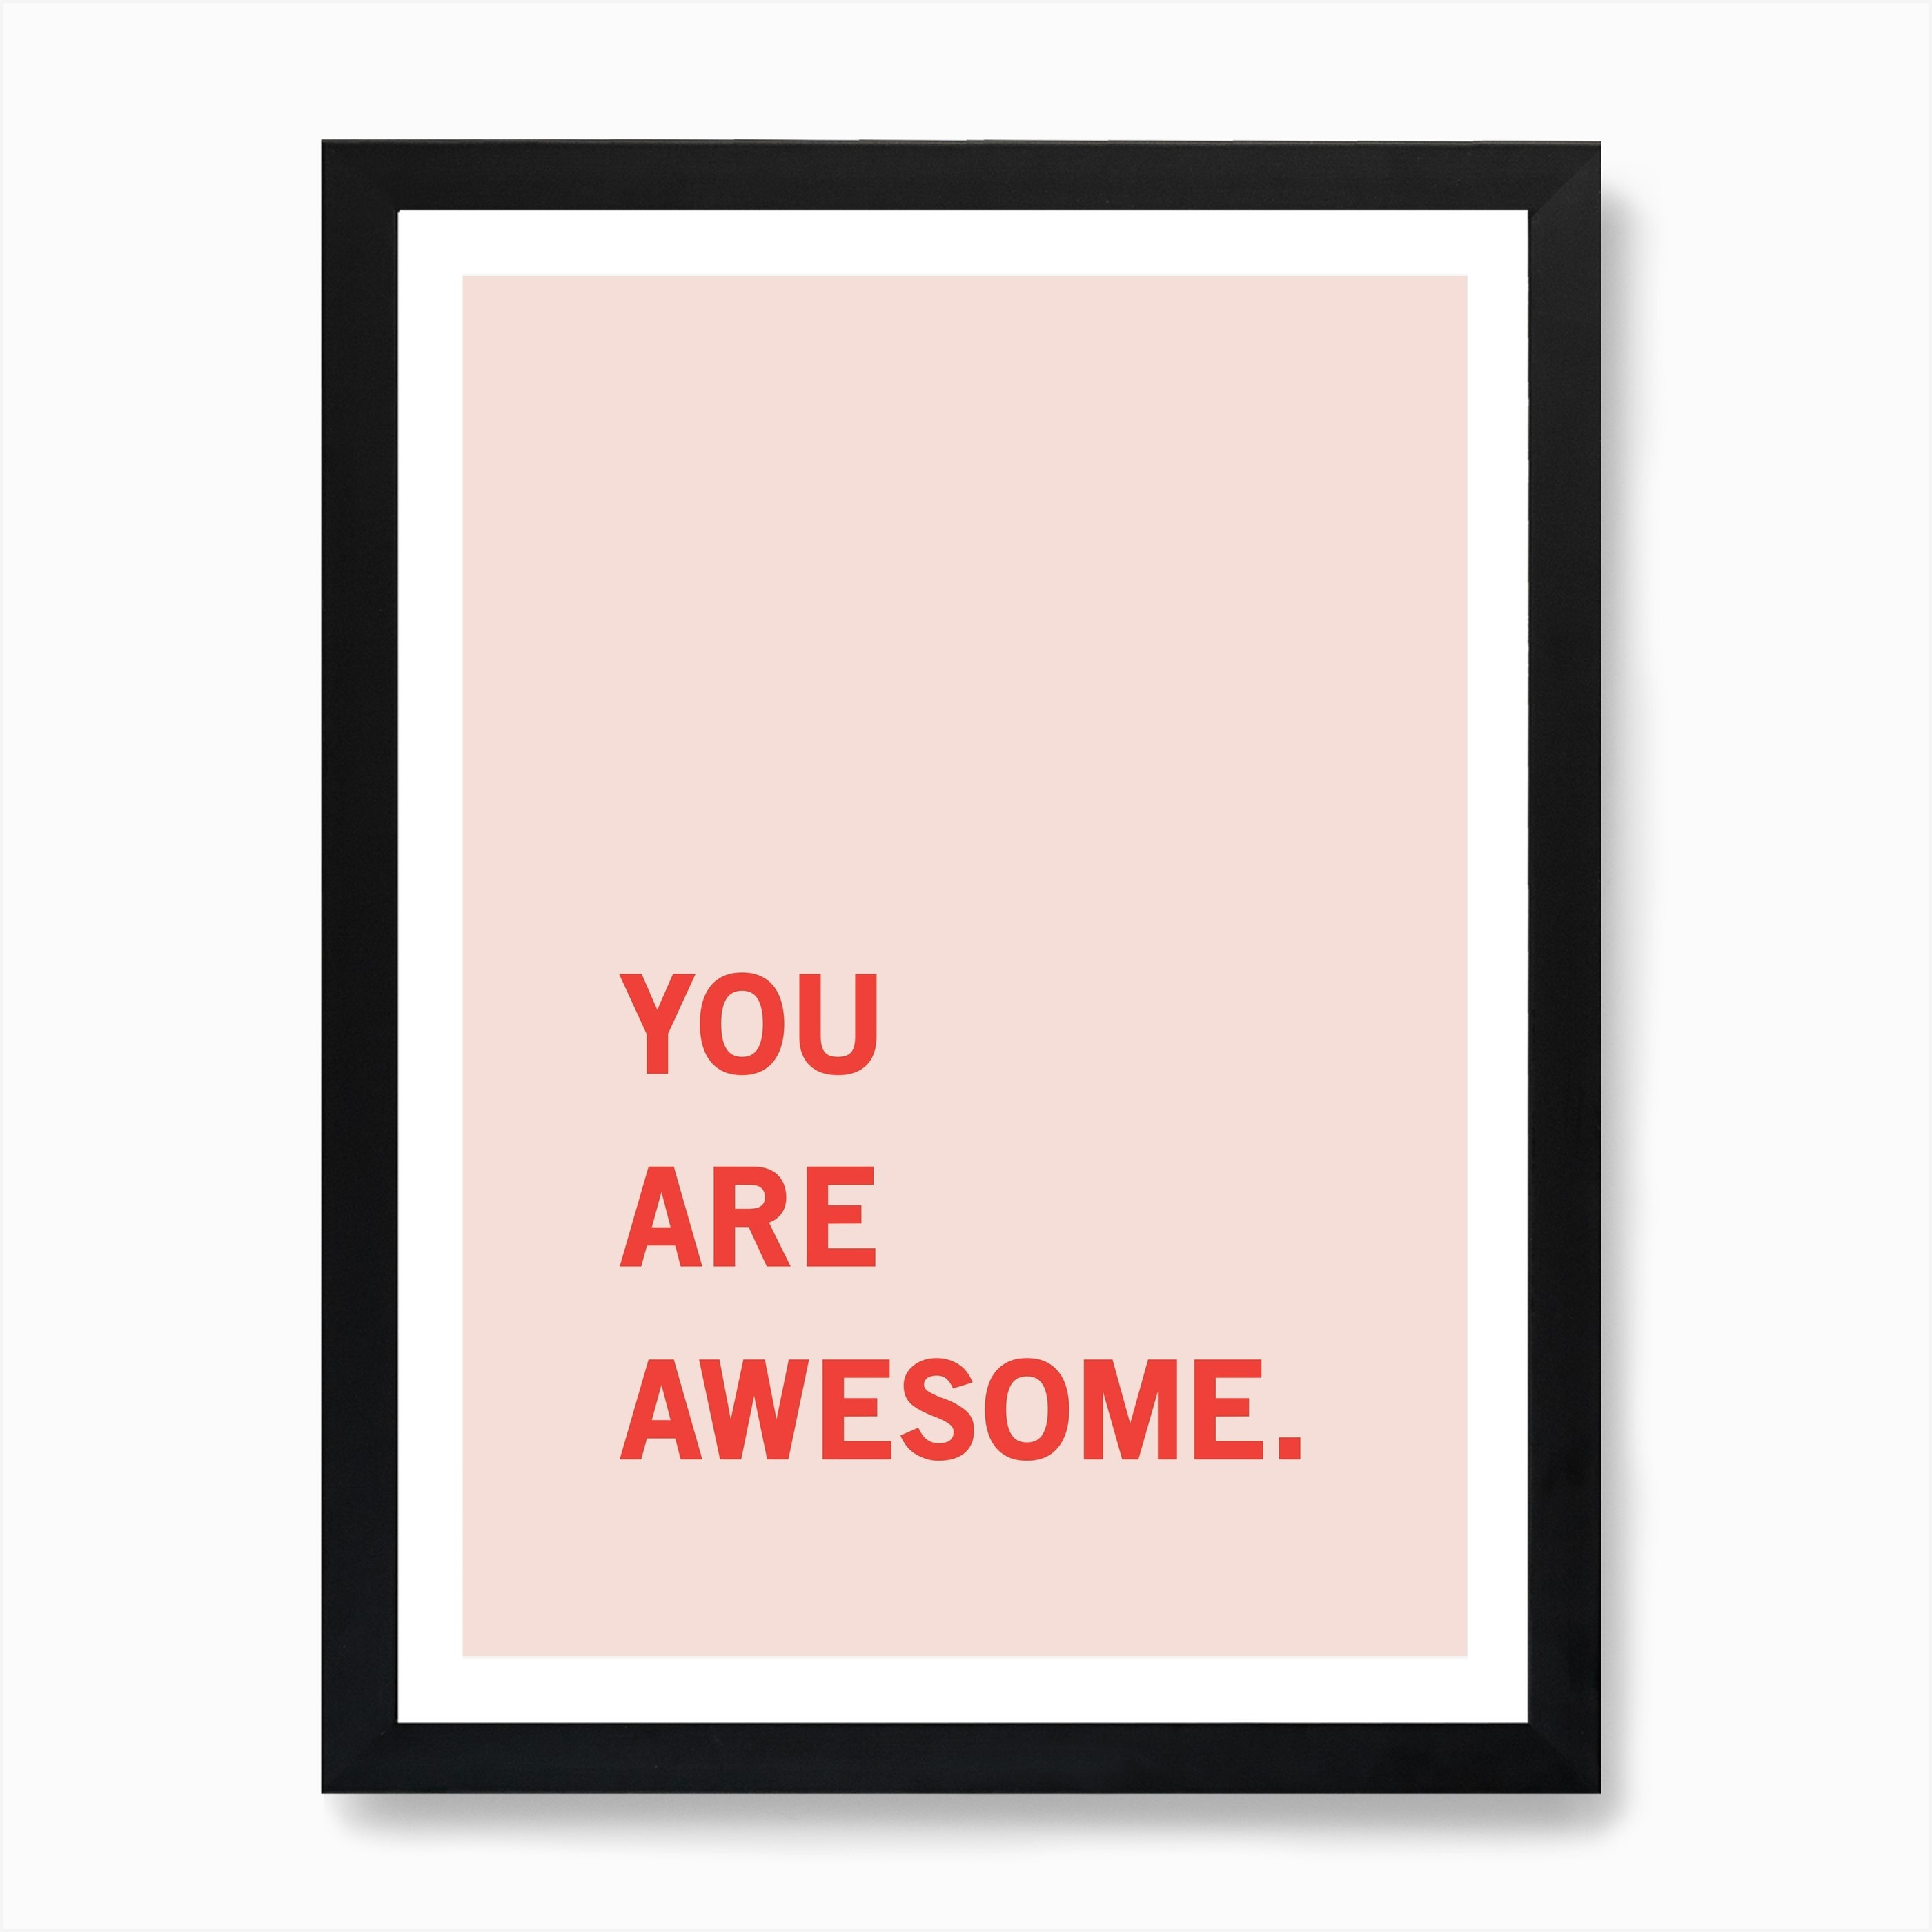 You Are Awesome Art Print by KookiePixel - Fy